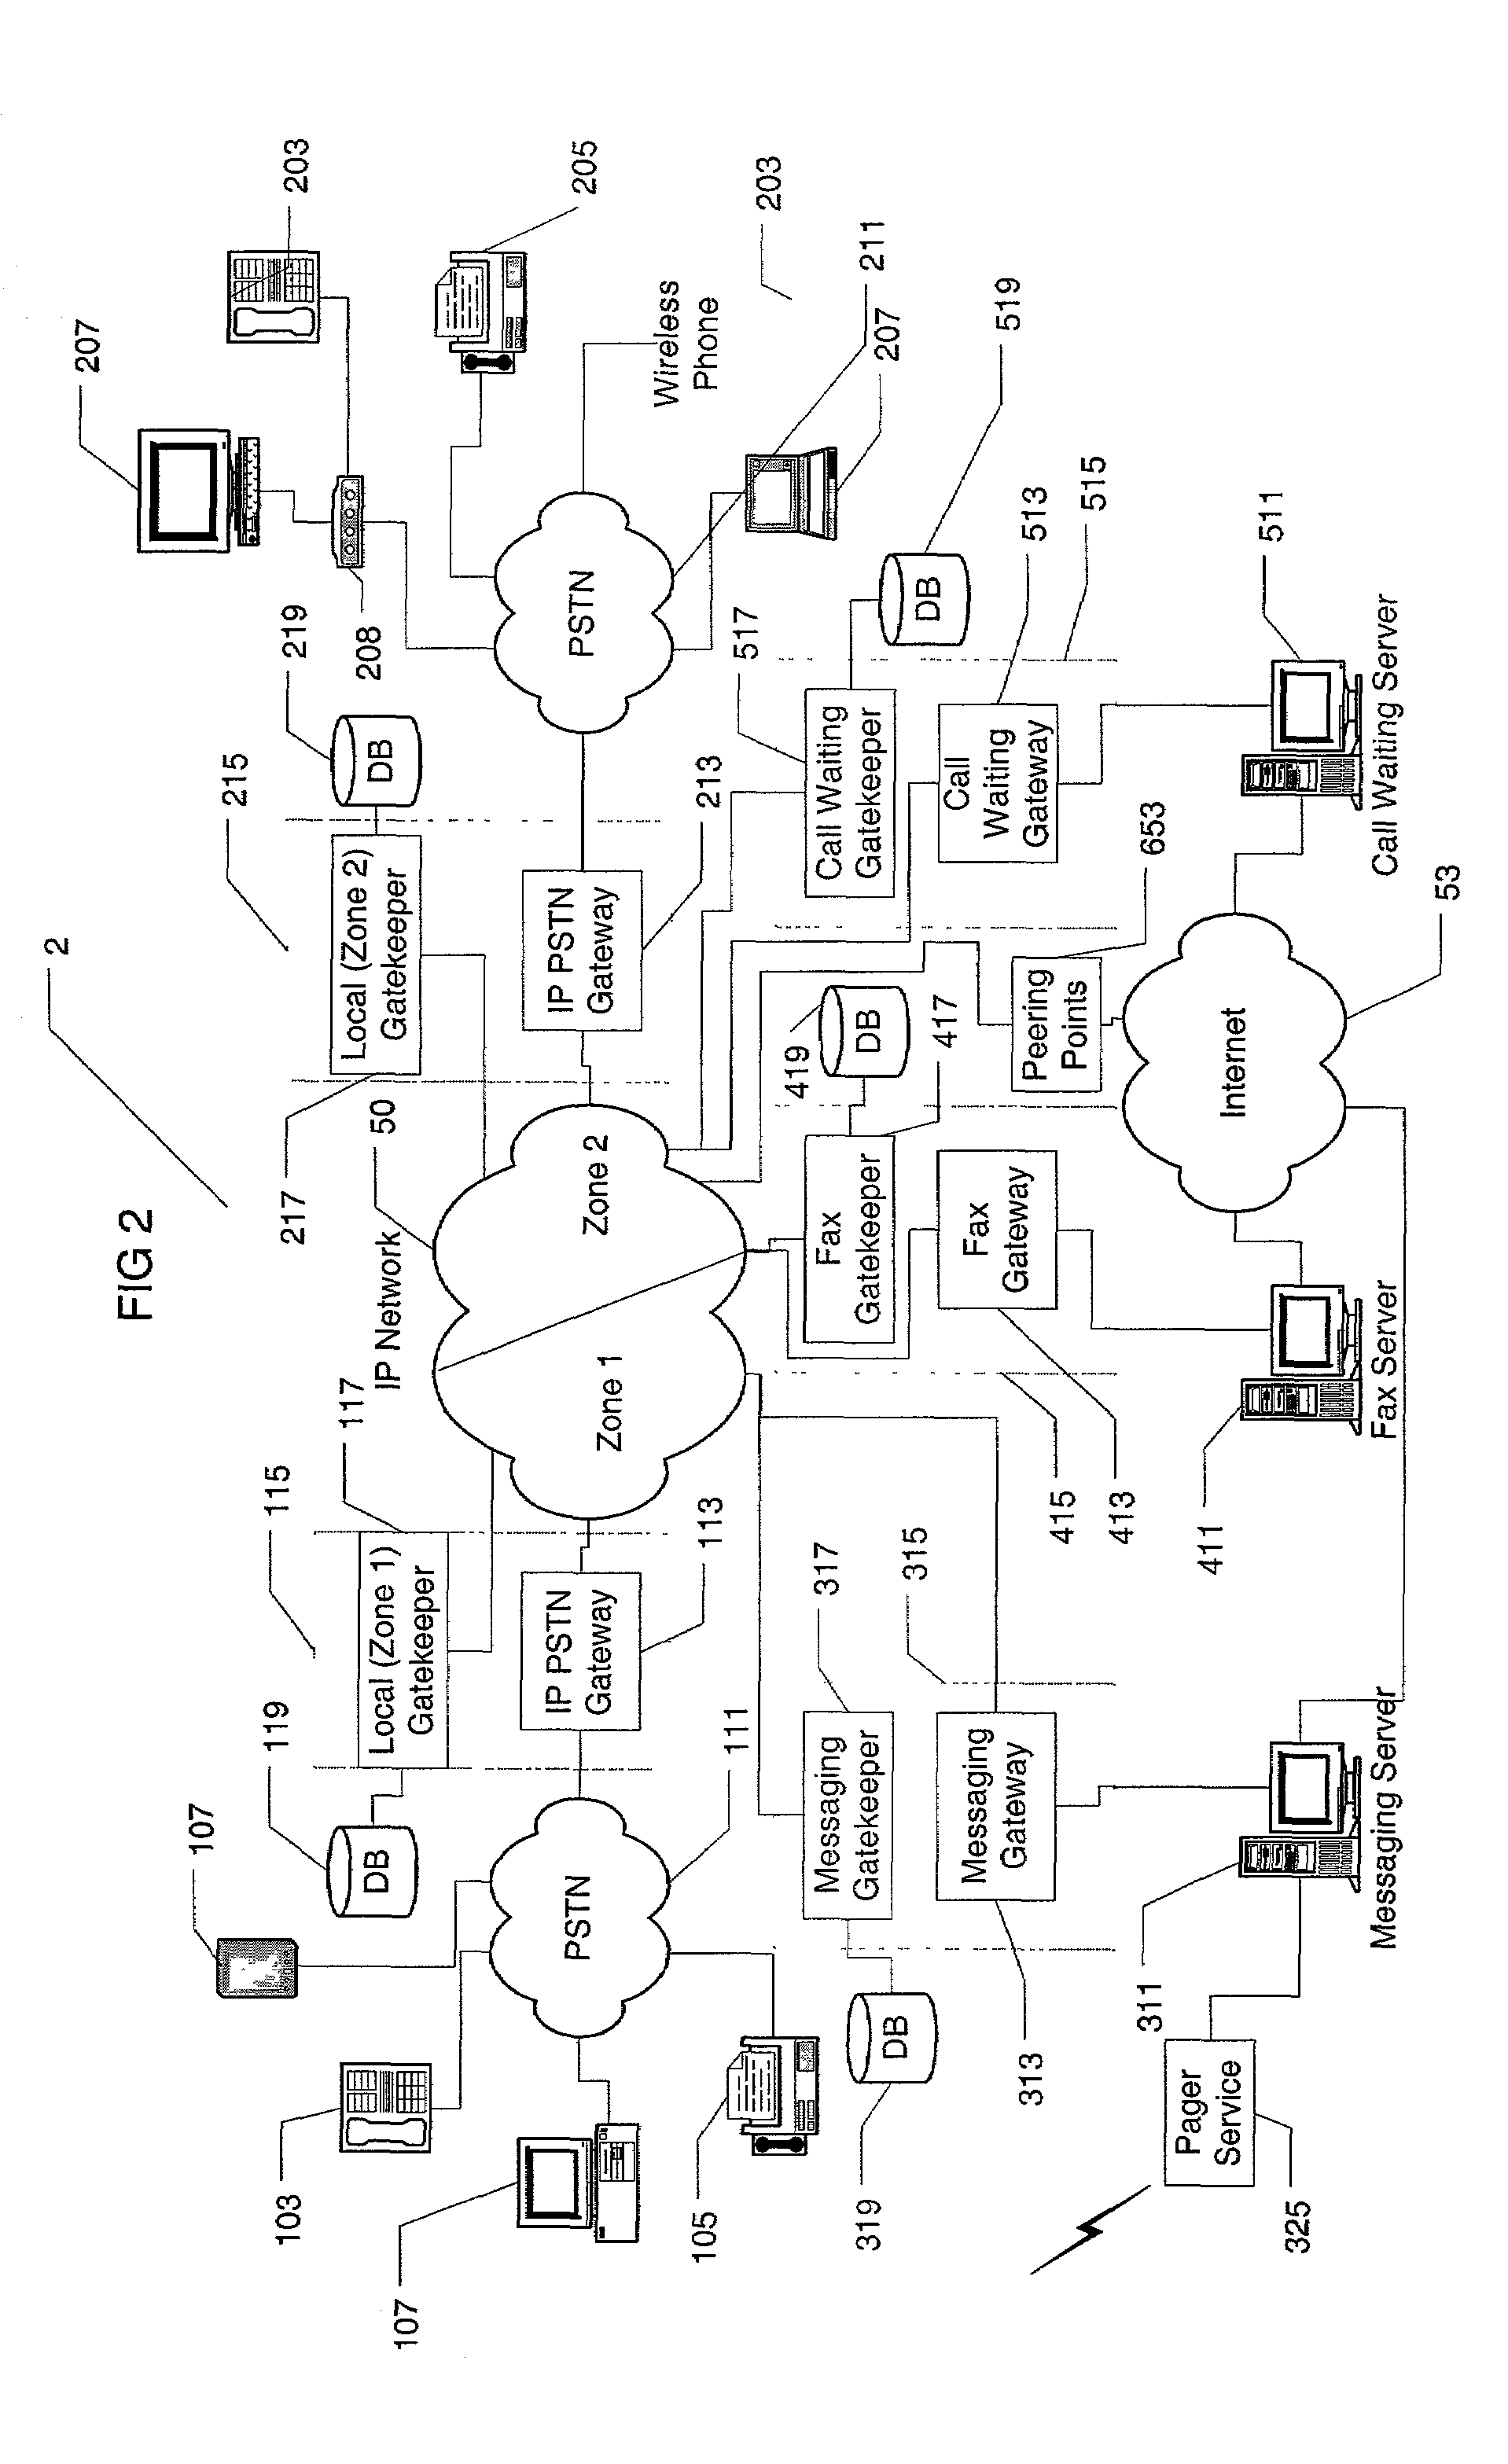 Allocation of channel capacity in multiservice networks